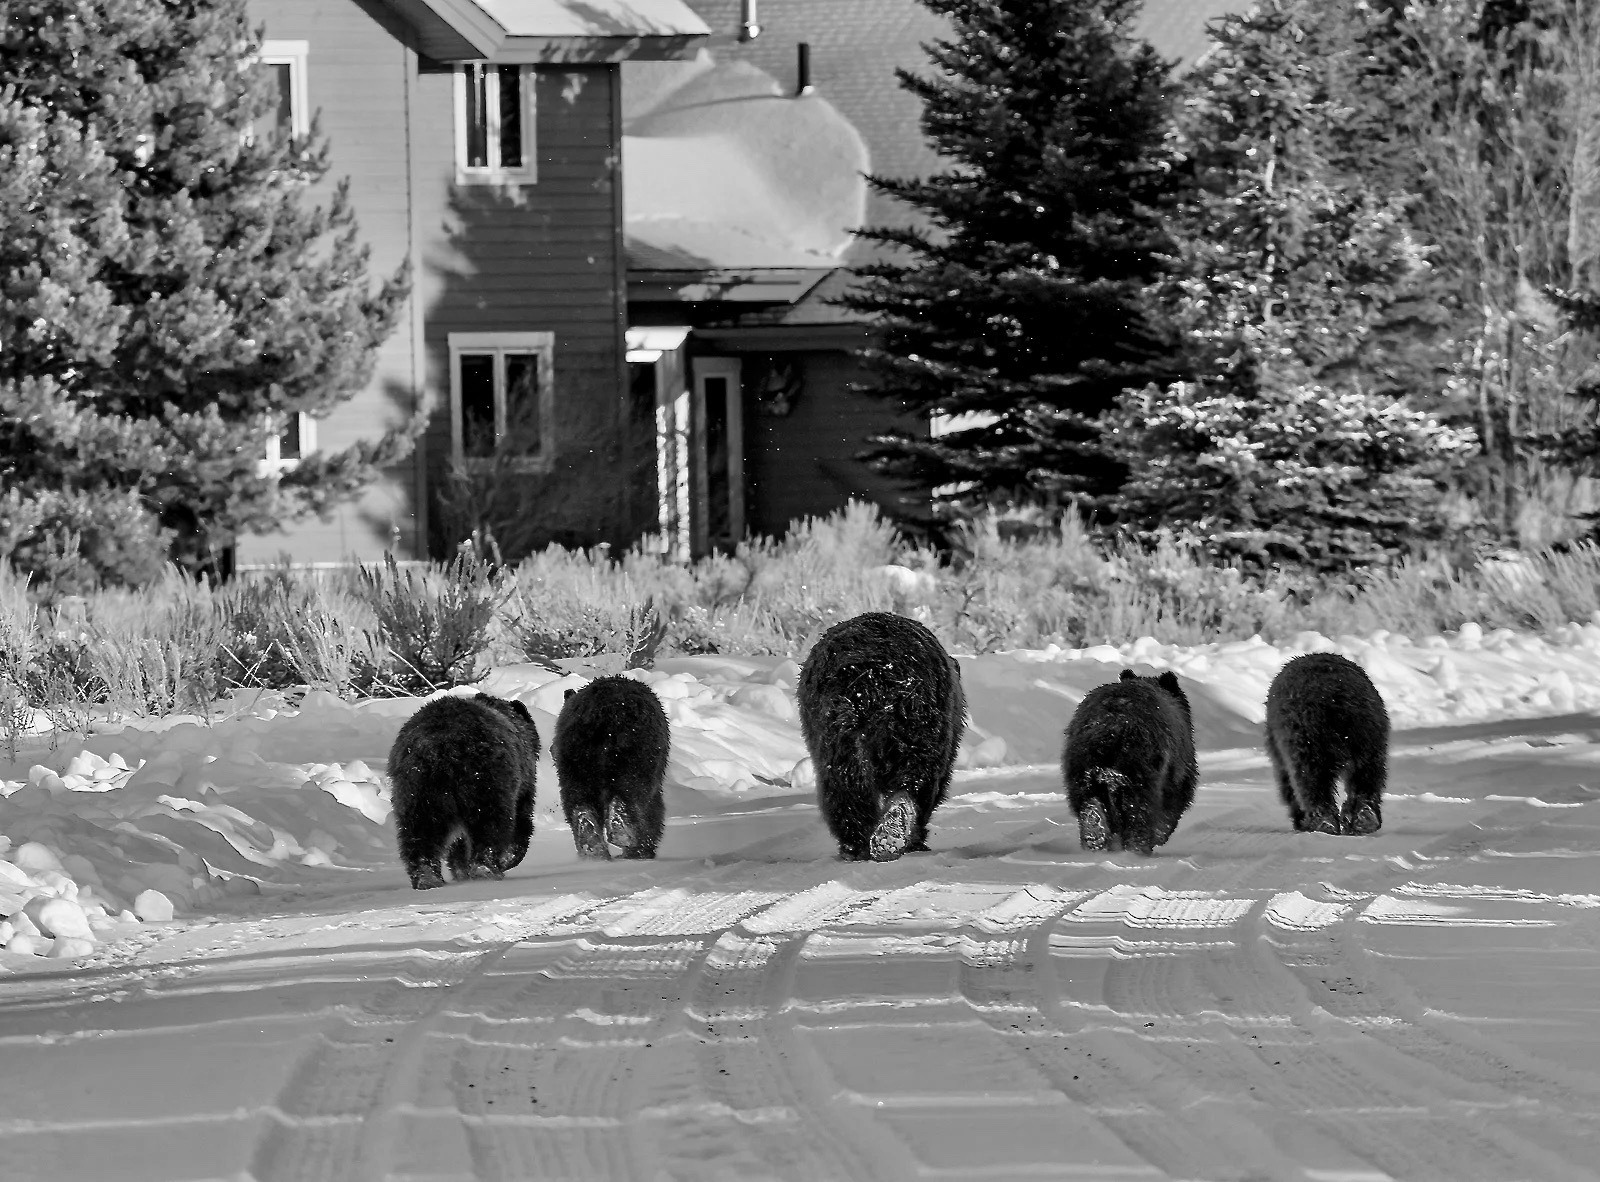 In late autumn 2021, Grizzly 399 and her then four yearling cubs wandered through a residential subdivision in Jackson Hole, among many human-related perils they had to navigate. In recent decades, hundreds of thousands of acres of rural land once thought to provide secure habitat for grizzlies and other species have been lost to sprawl throughout the Northern Rockies. Photo courtesy Thomas D. Mangelsen. To see more of Mangelsen's collectible fine art photography go to mangelsen.com